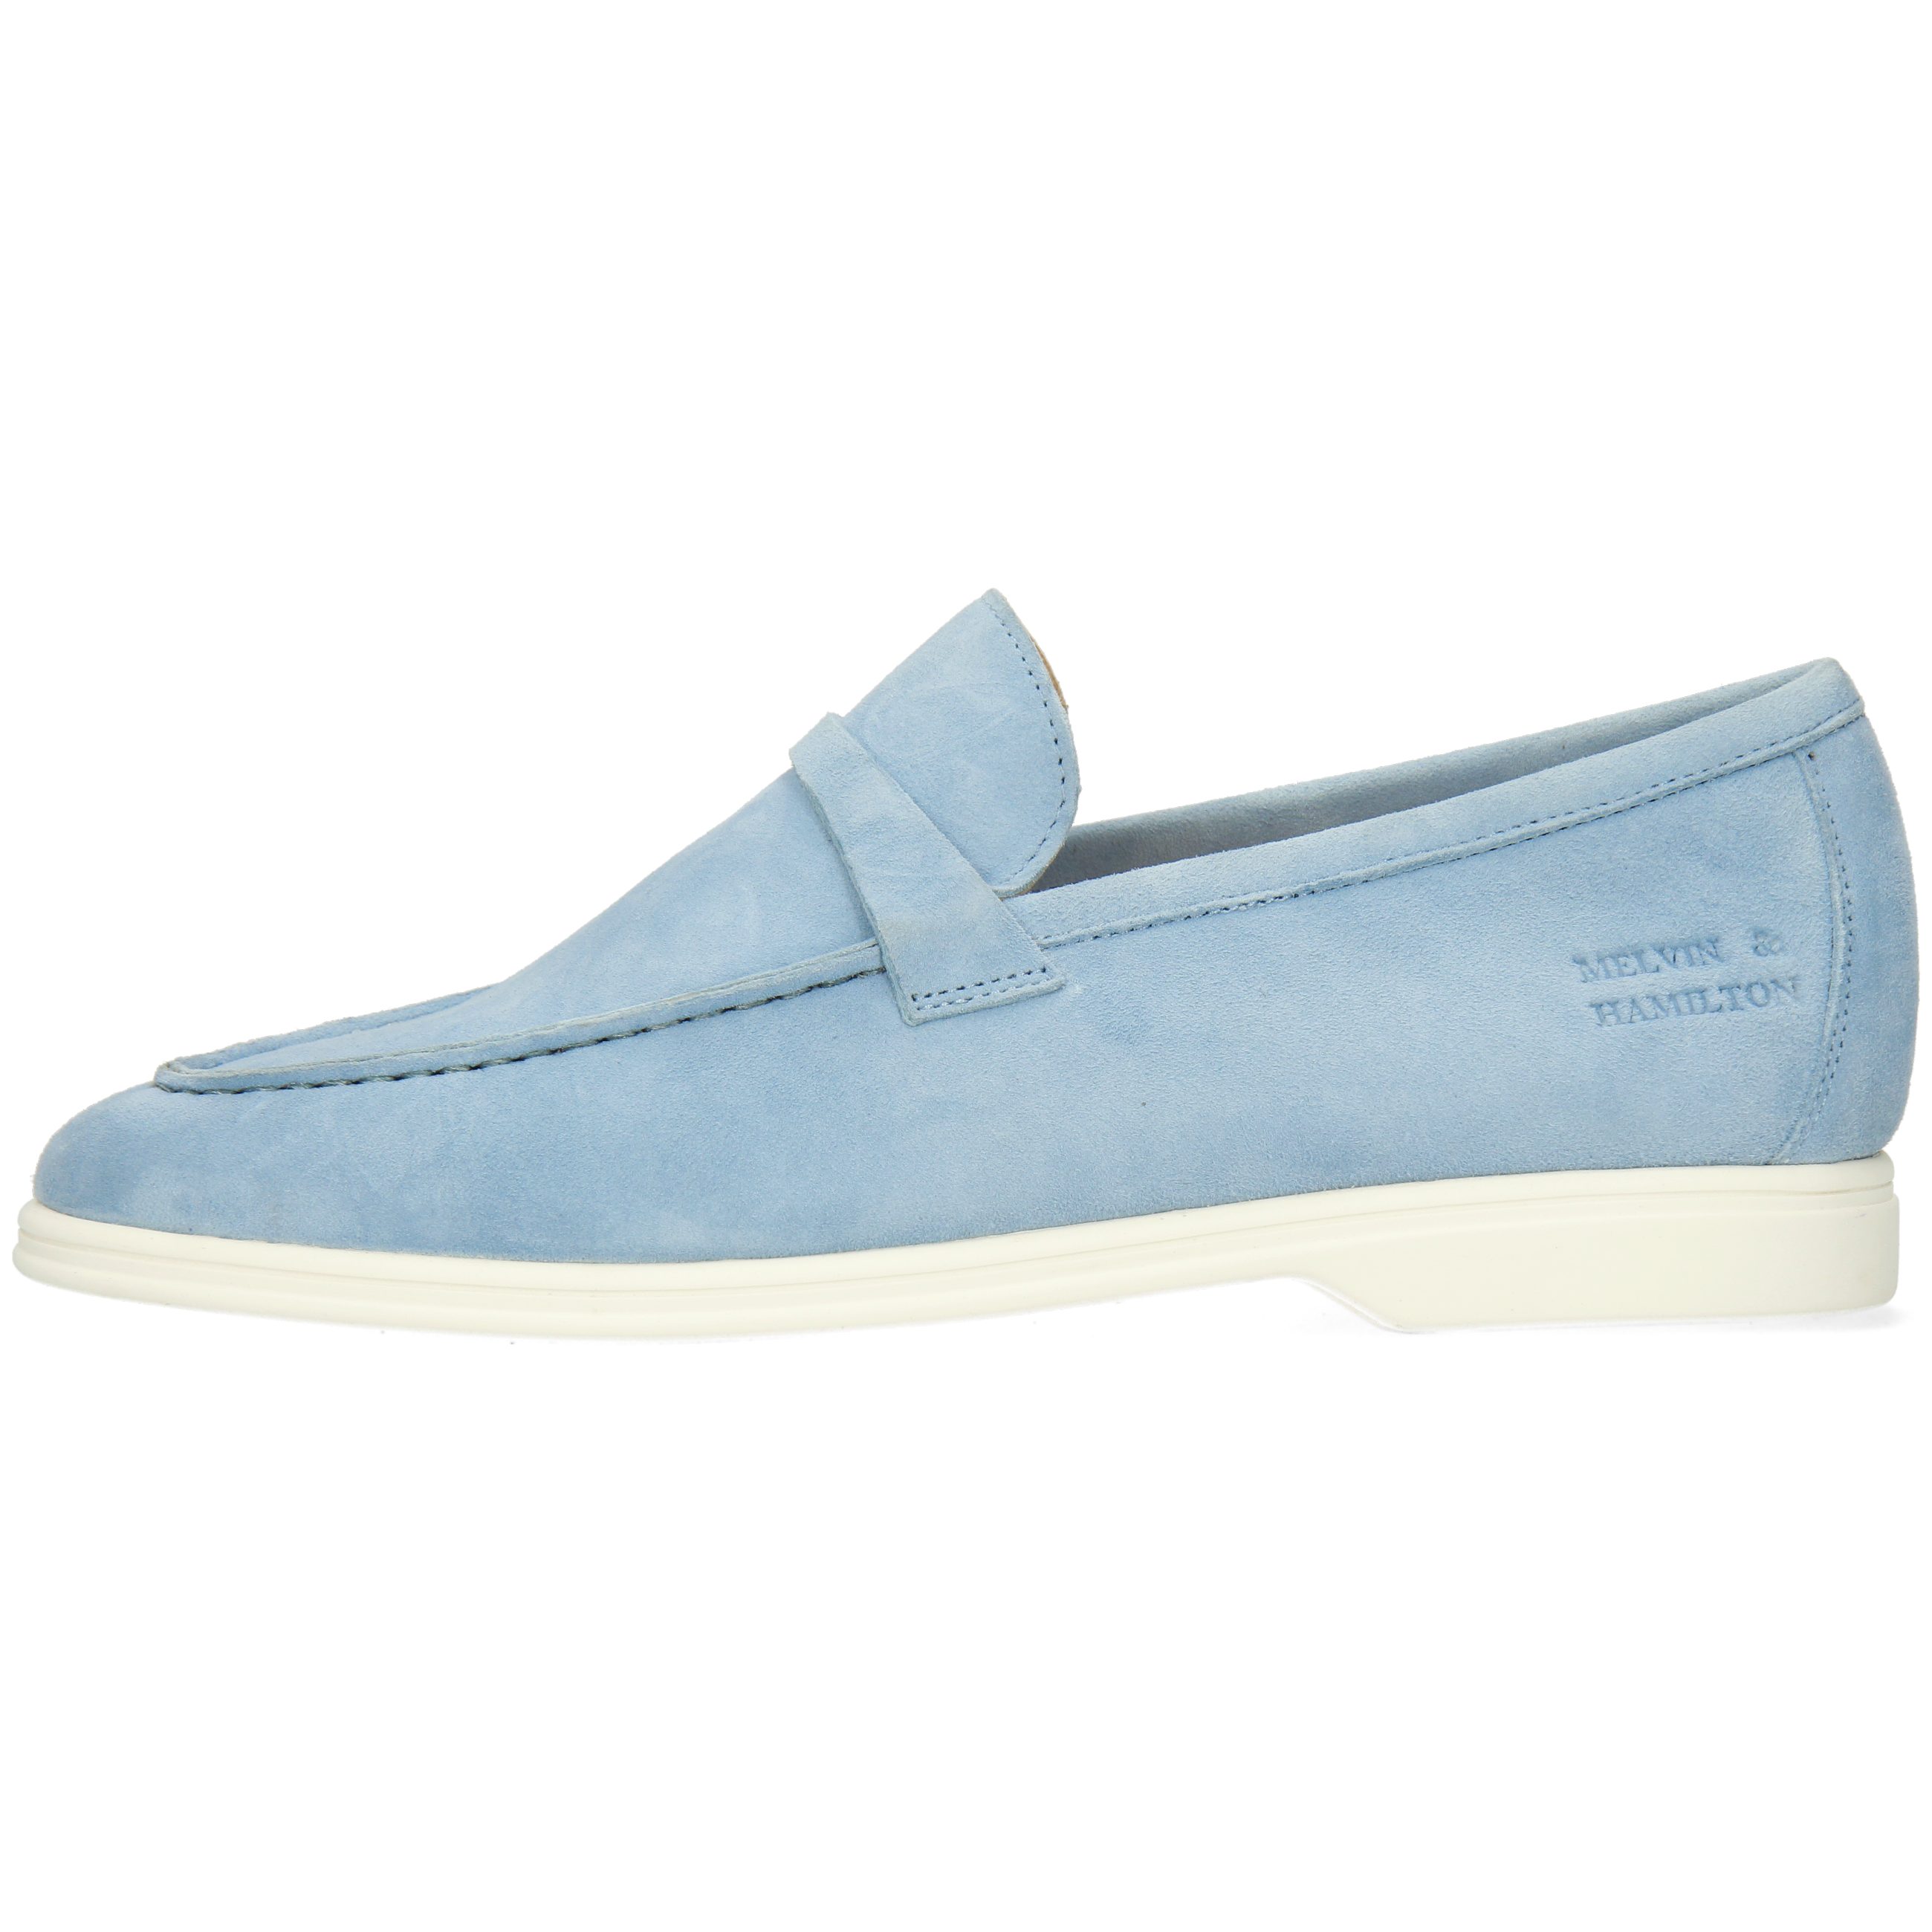 Adley Melvin Goat Sky Hamilton 3 Loafer Suede Accessory &